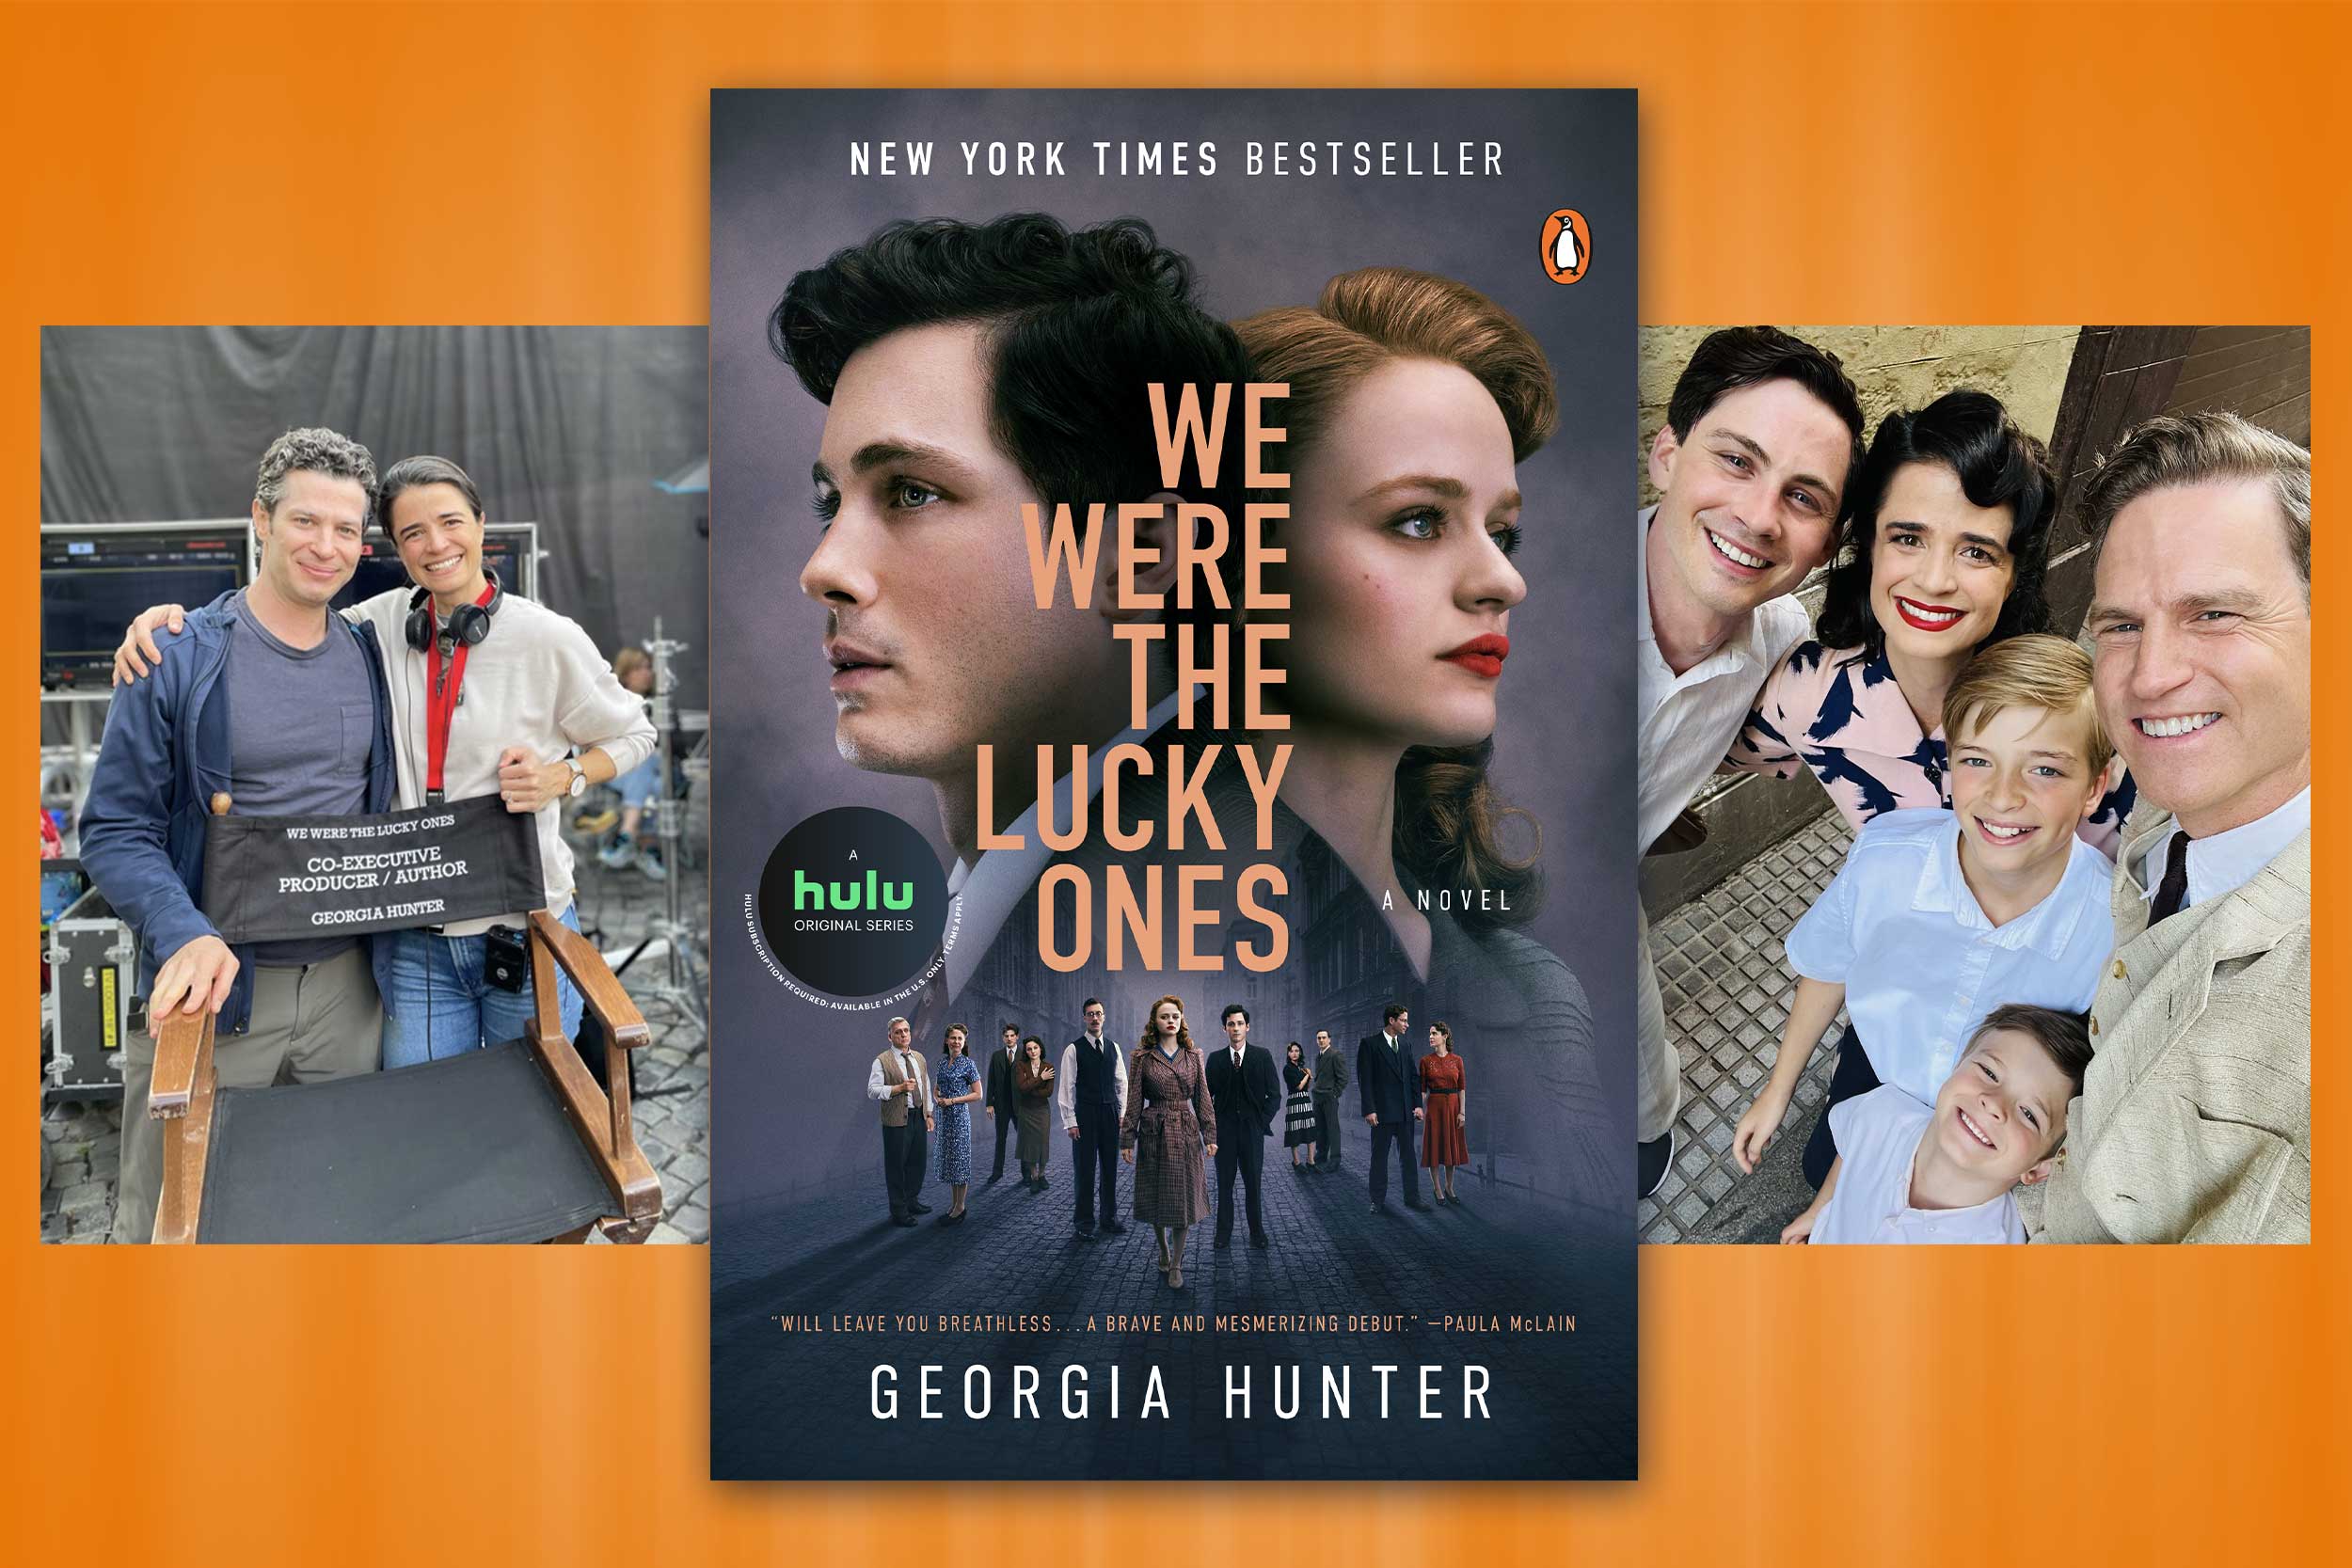 Three photos against an orange background: on the left, Georgia Hunter stands and smiles with director Thomas Kail; in the center, a promotional poster for Hulu series "We Were the Lucky Ones"; to the right, the leads of the show pose and smile in period costumes.